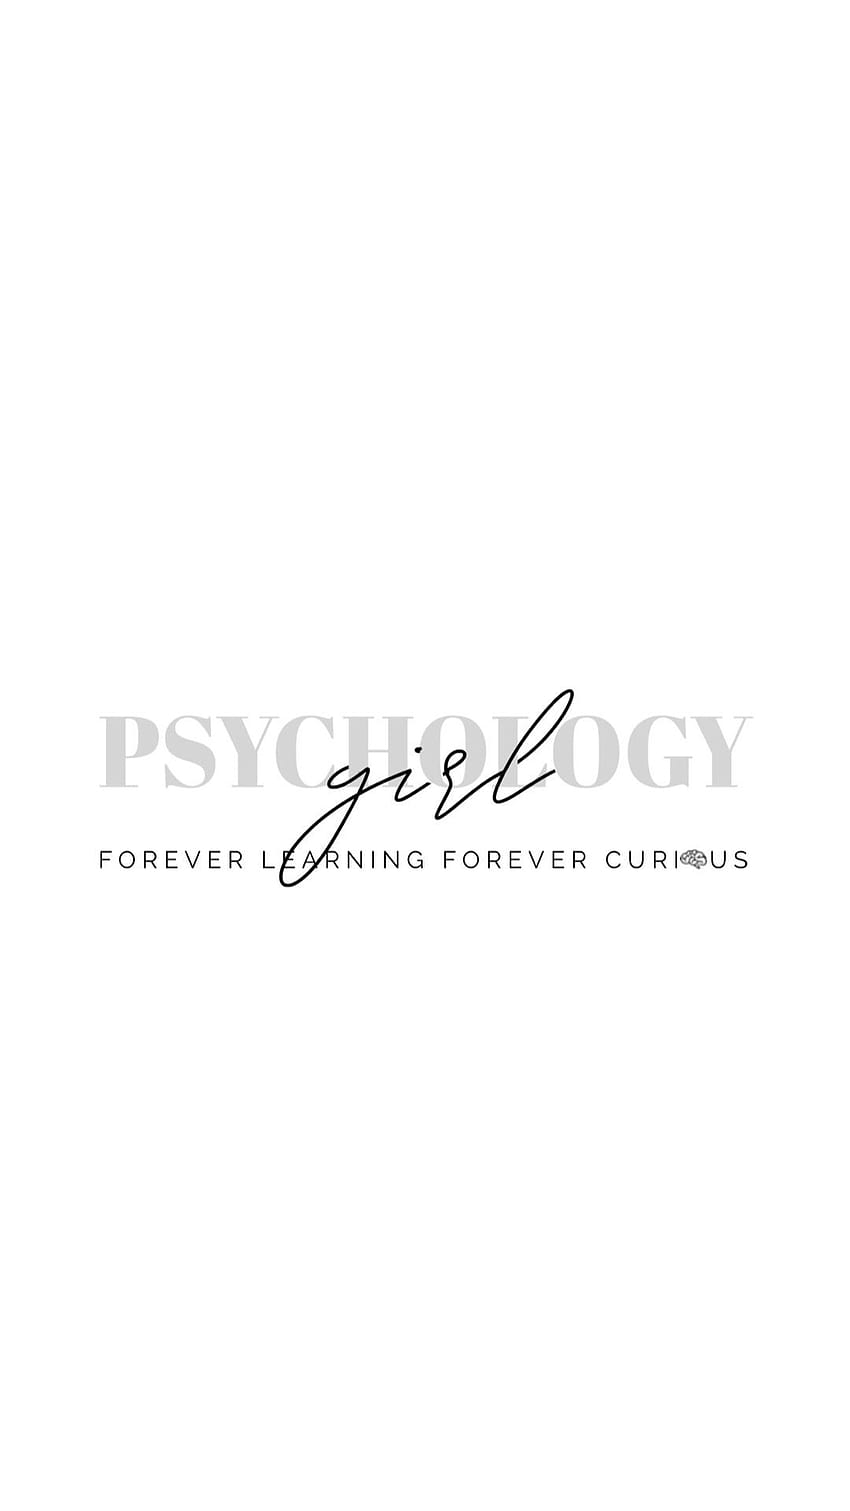 A PSYCHOLOGY GIRL – Forever Curious, Forever Learning, psychologist HD phone wallpaper